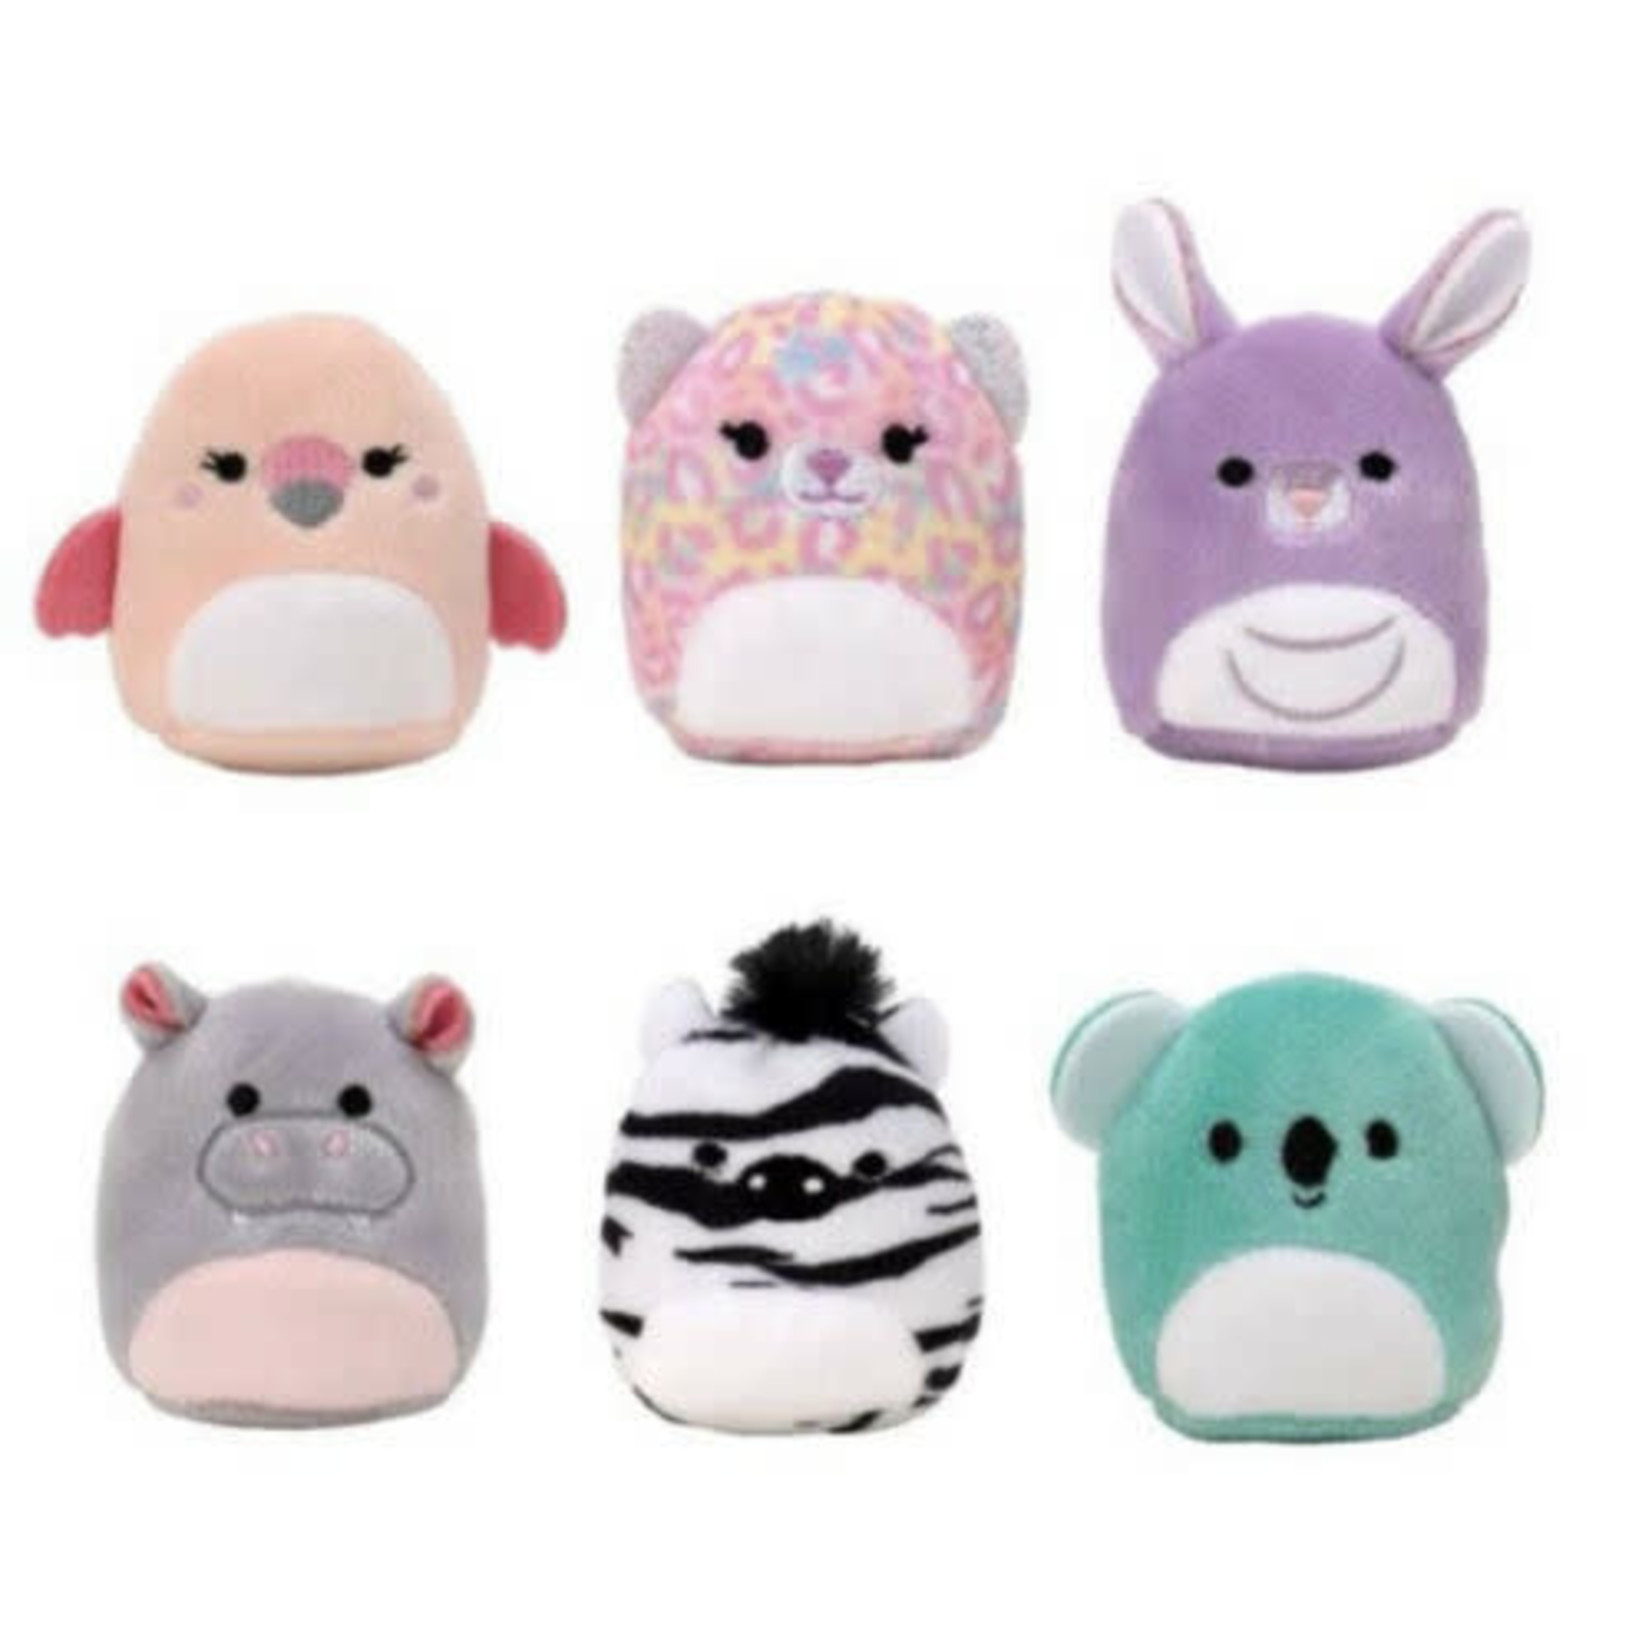 Squishville by Squishmallows 2-Inch Mini-Plush 6-Pack